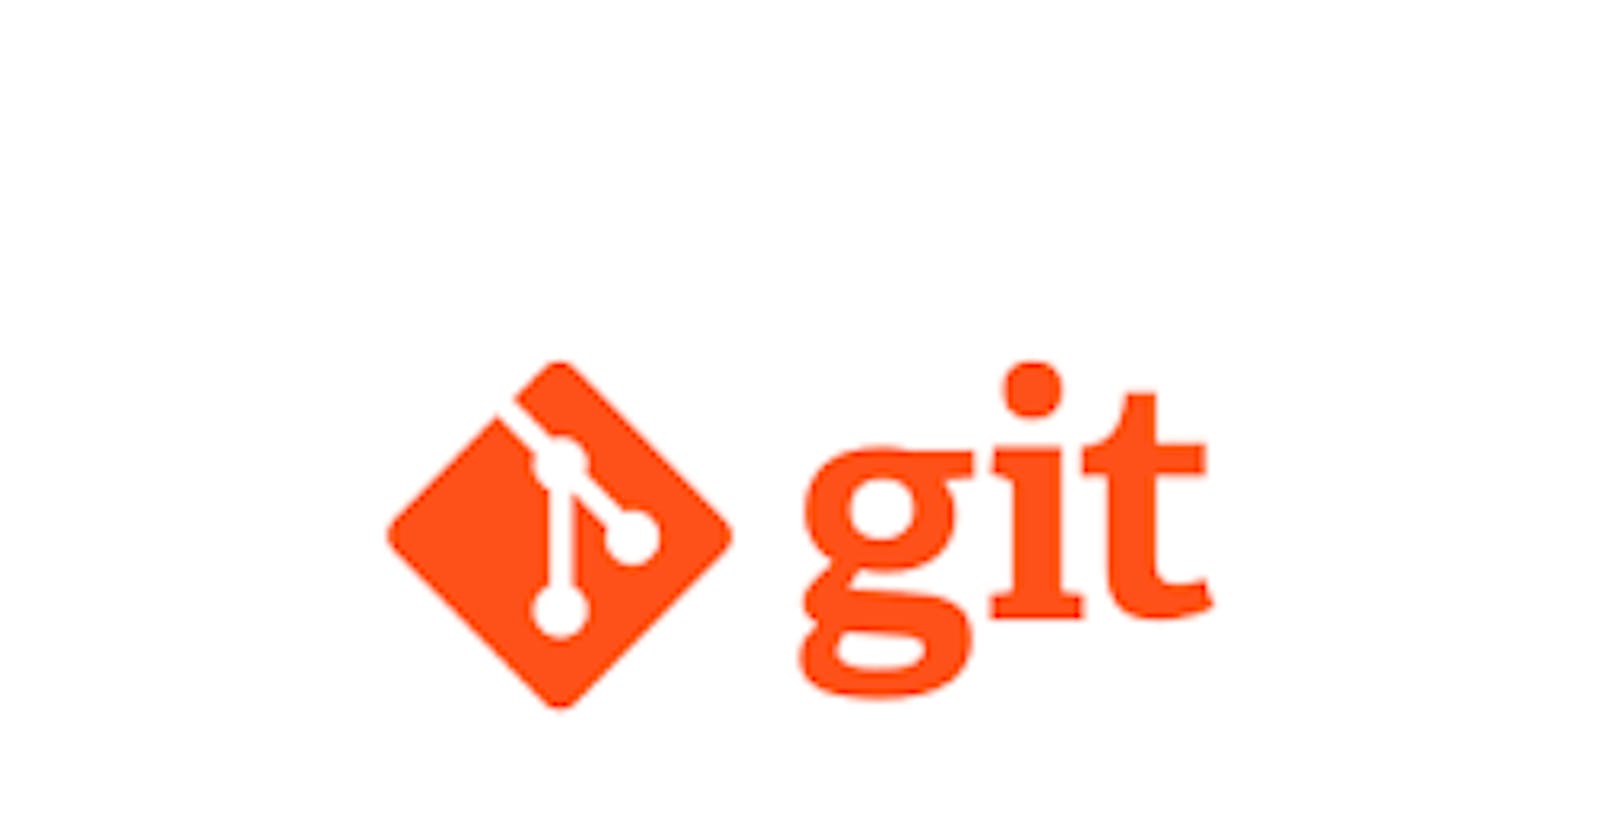 How to use Git? (101) 🤔